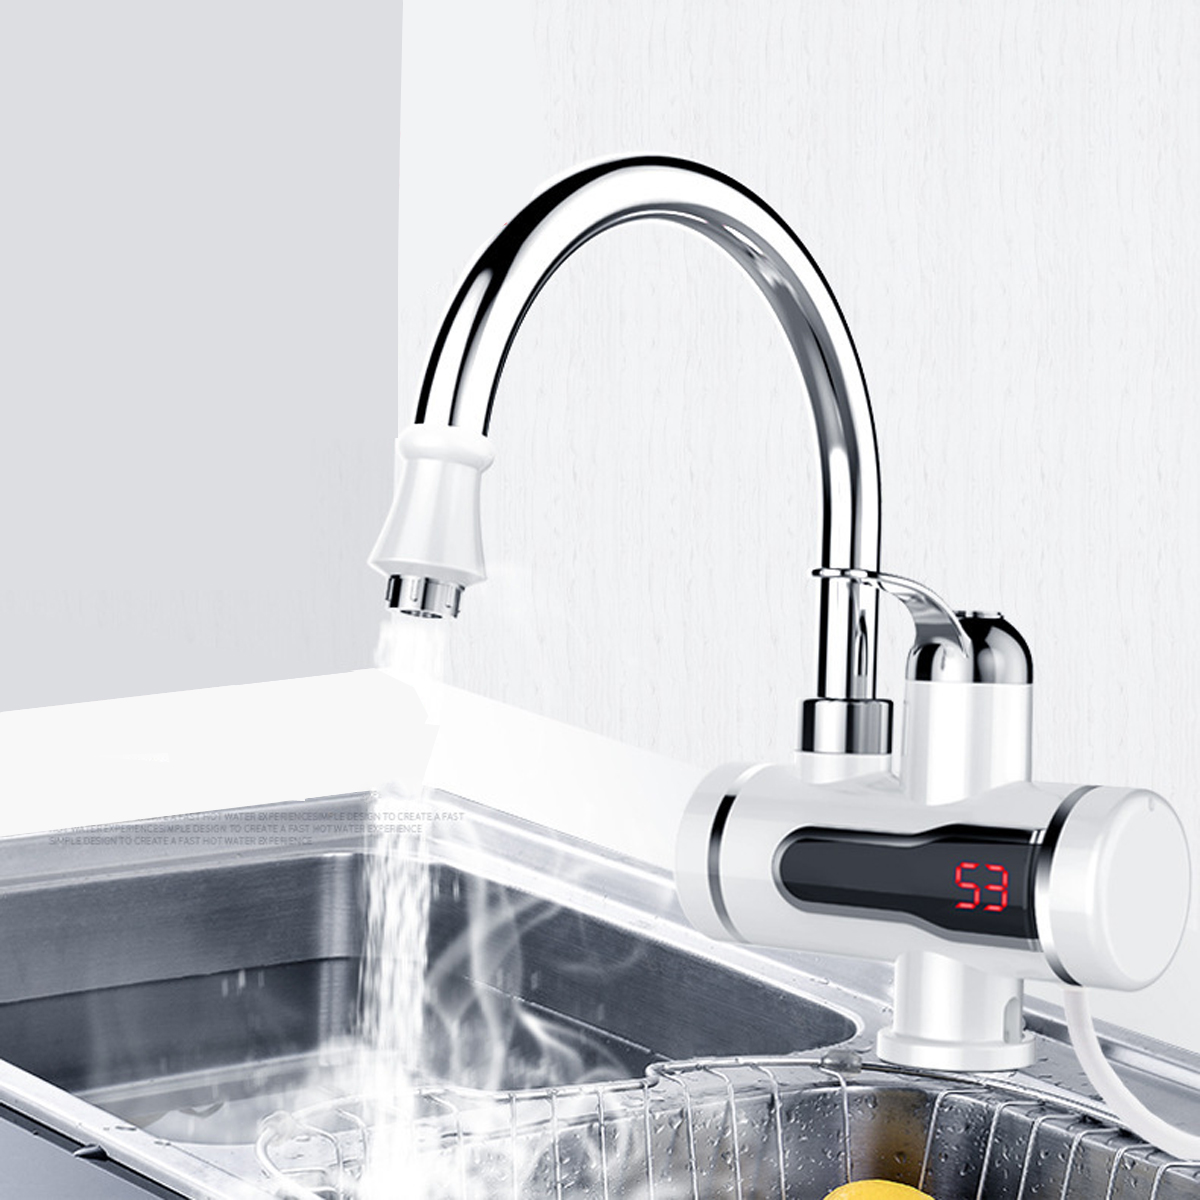 

3000W 220V LED Display Electric Instant Heating Faucet Tap Hot Faucet Water Heater Water Heating